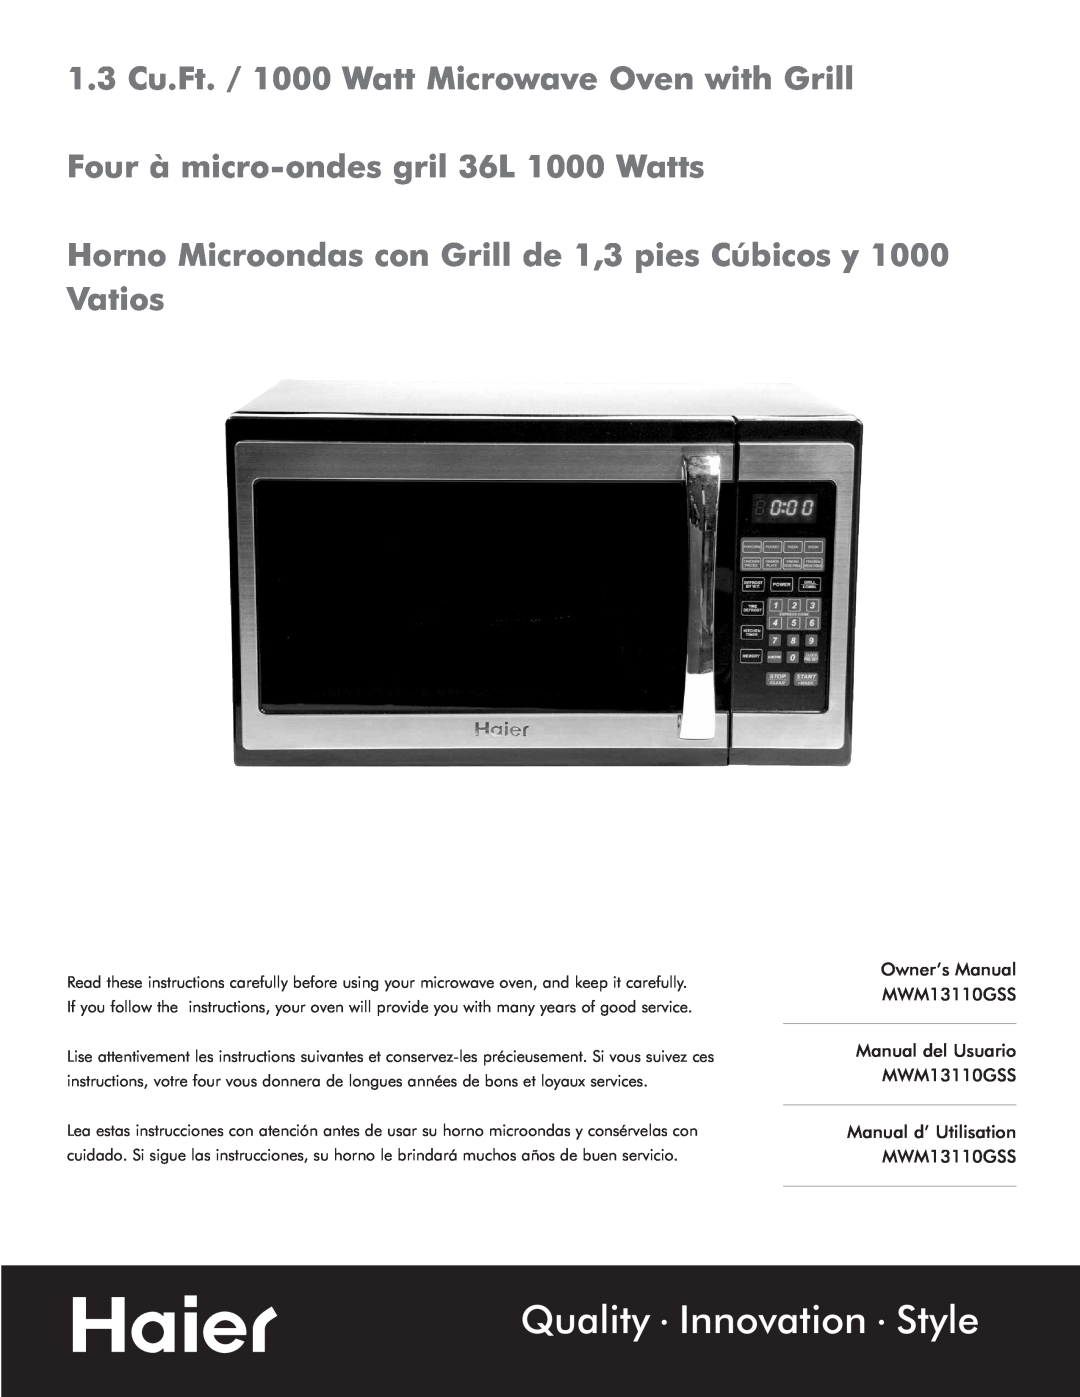 Haier MWM13110GSS owner manual Quality Innovation Style, 1.3 Cu.Ft. / 1000 Watt Microwave Oven with Grill 